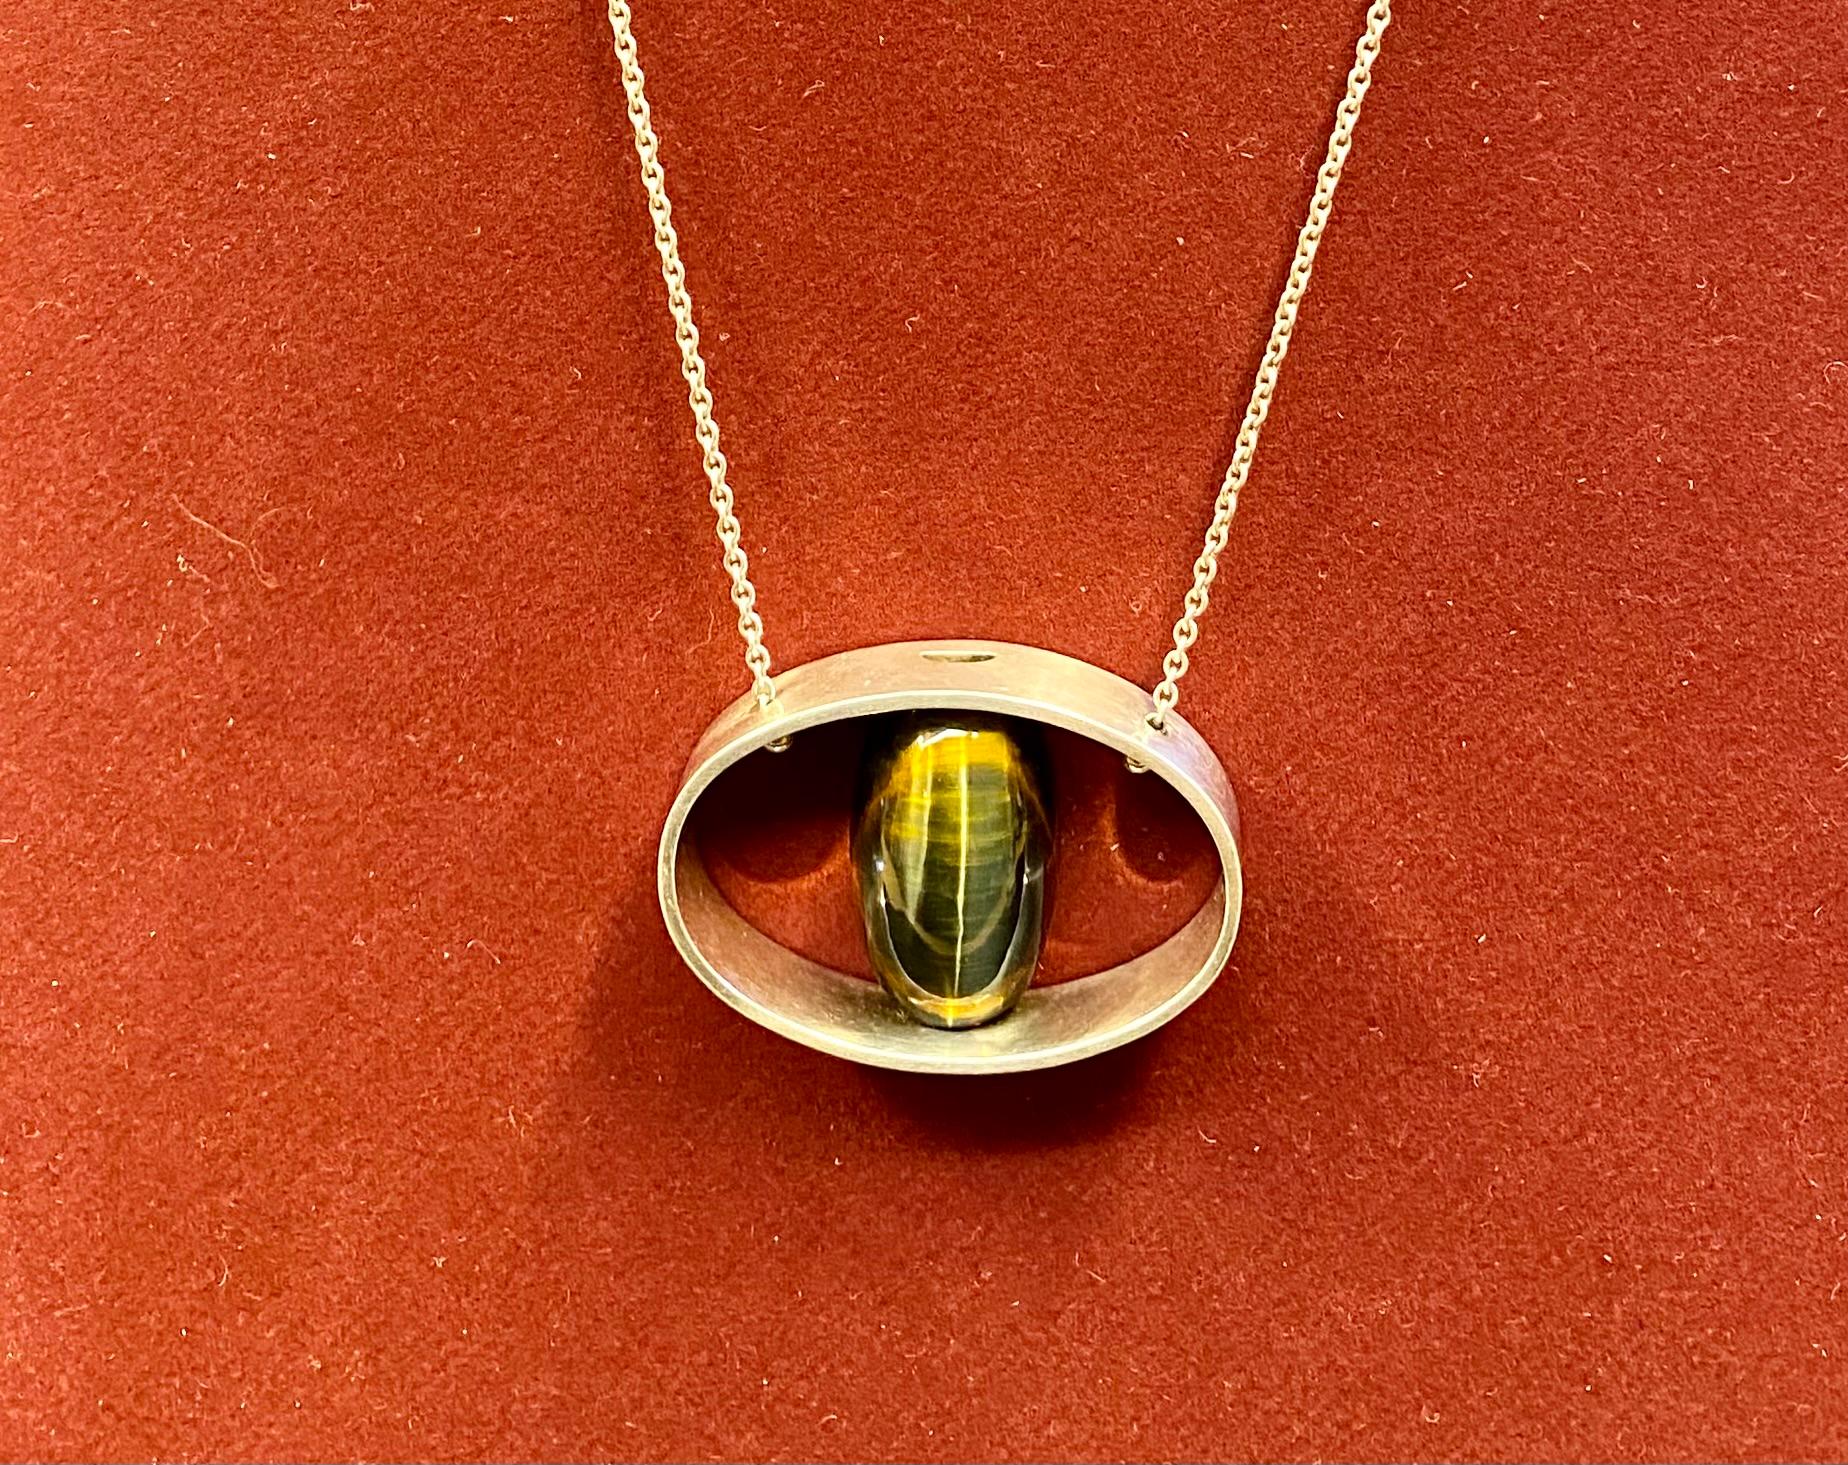 
Necklace, Silver and Tiger's eye Stone Kaunis Koru Oy Finland
BEAUTIFUL JEWELRY, necklace, silver and tiger's eye
916 Silver - year 1966 - chain length 47 cm - gross weight approx. 16.2 g